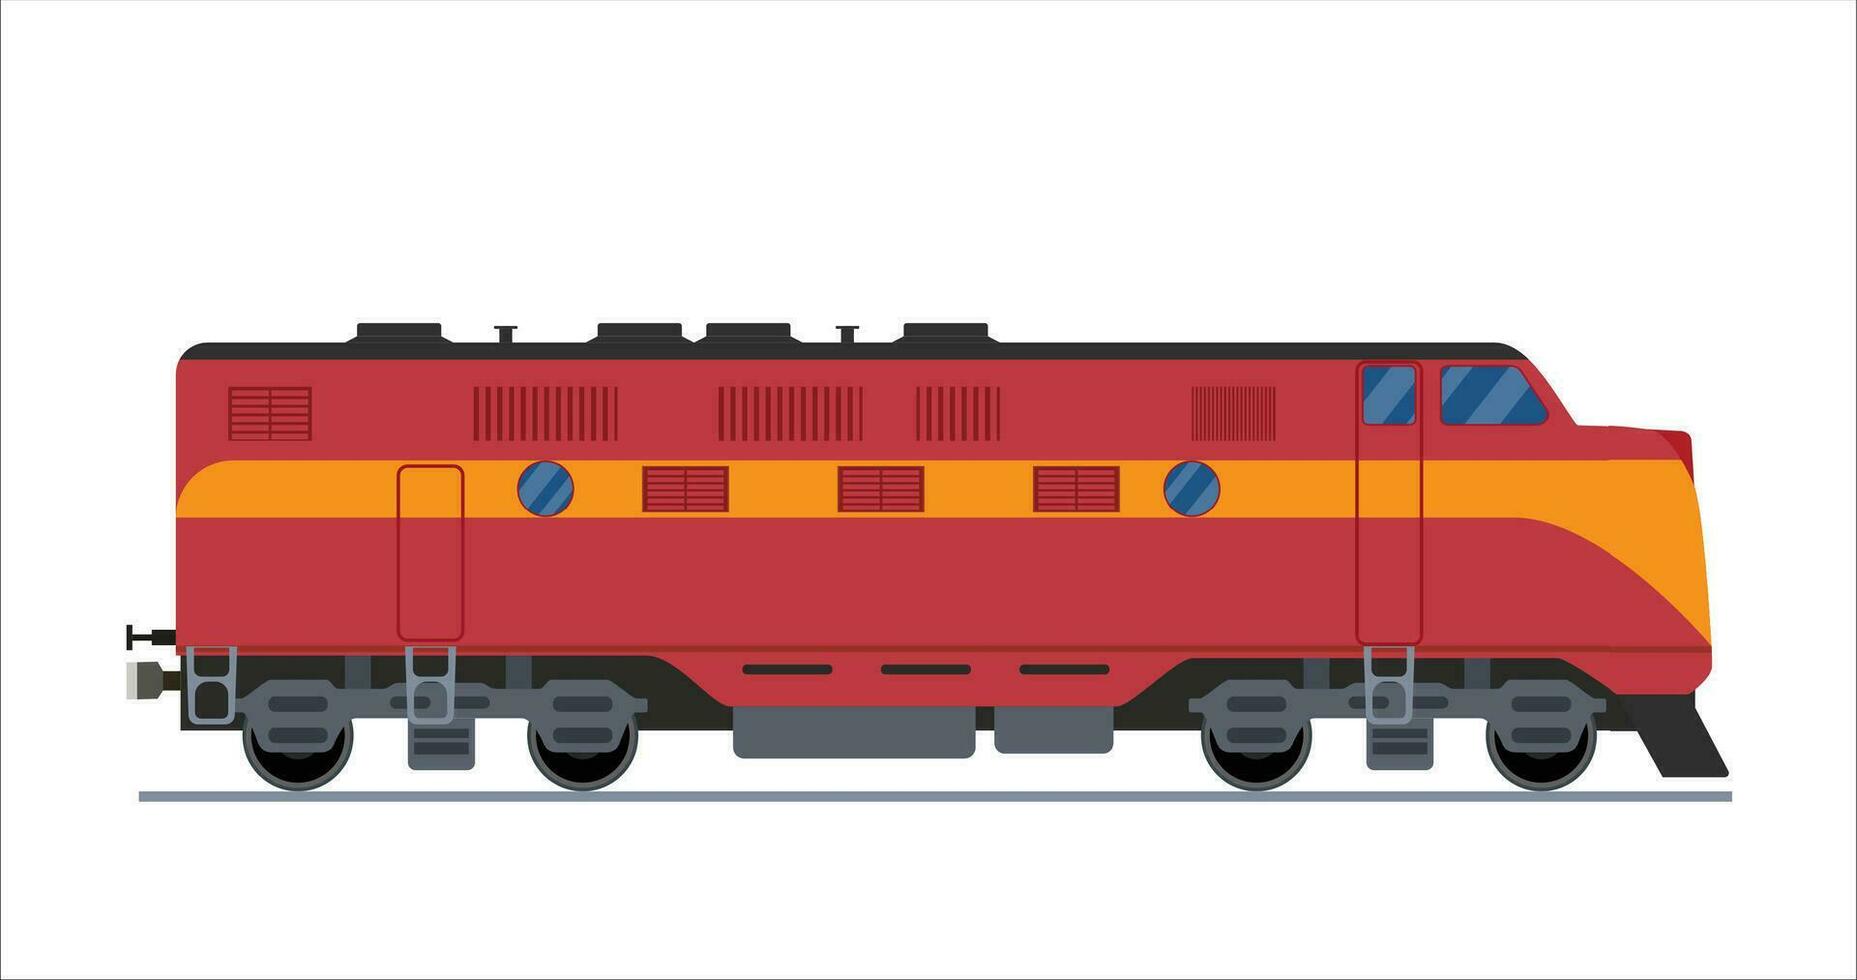 Freight train isolated on white background. railway locomotive icon. Cargo train on railroad. Vector illustration in flat style